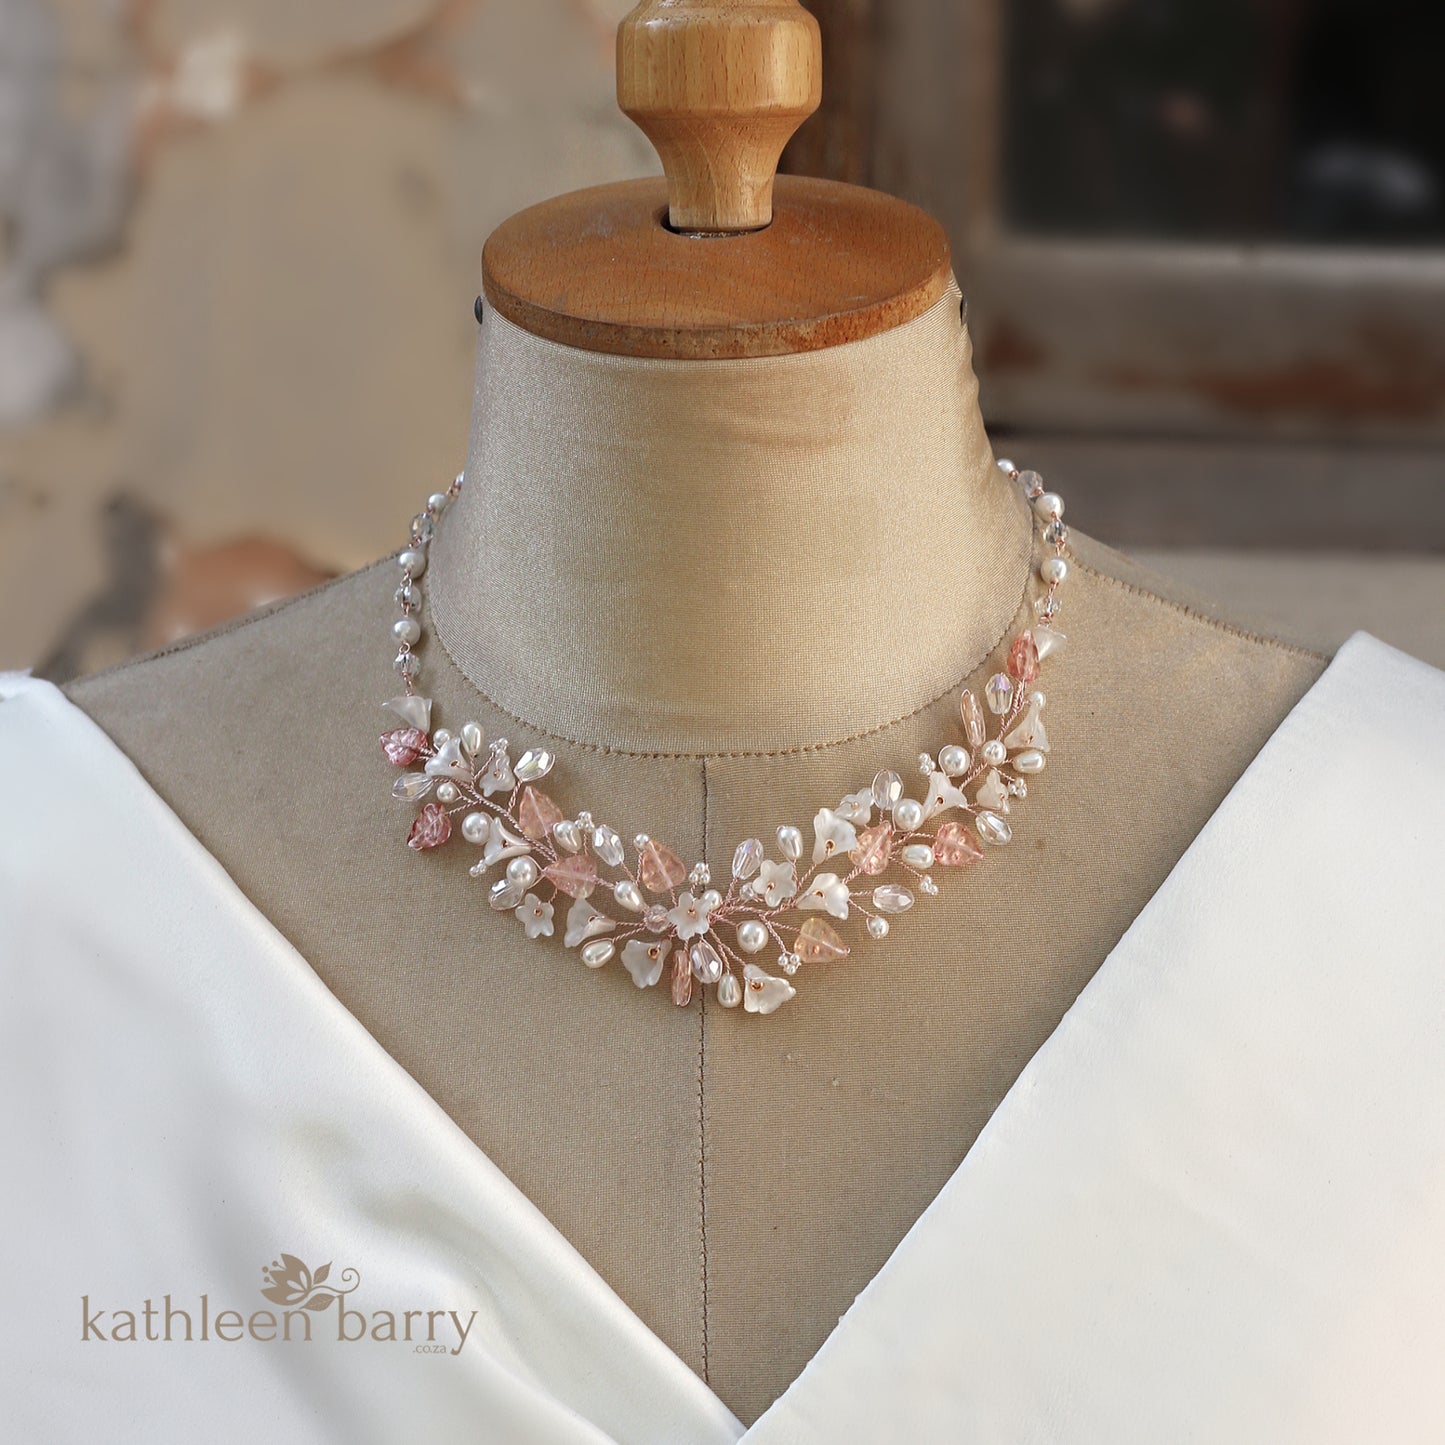 Shelby floral necklace - Flowers, leaves, crystals and pearls in rose gold, gold or silver finish